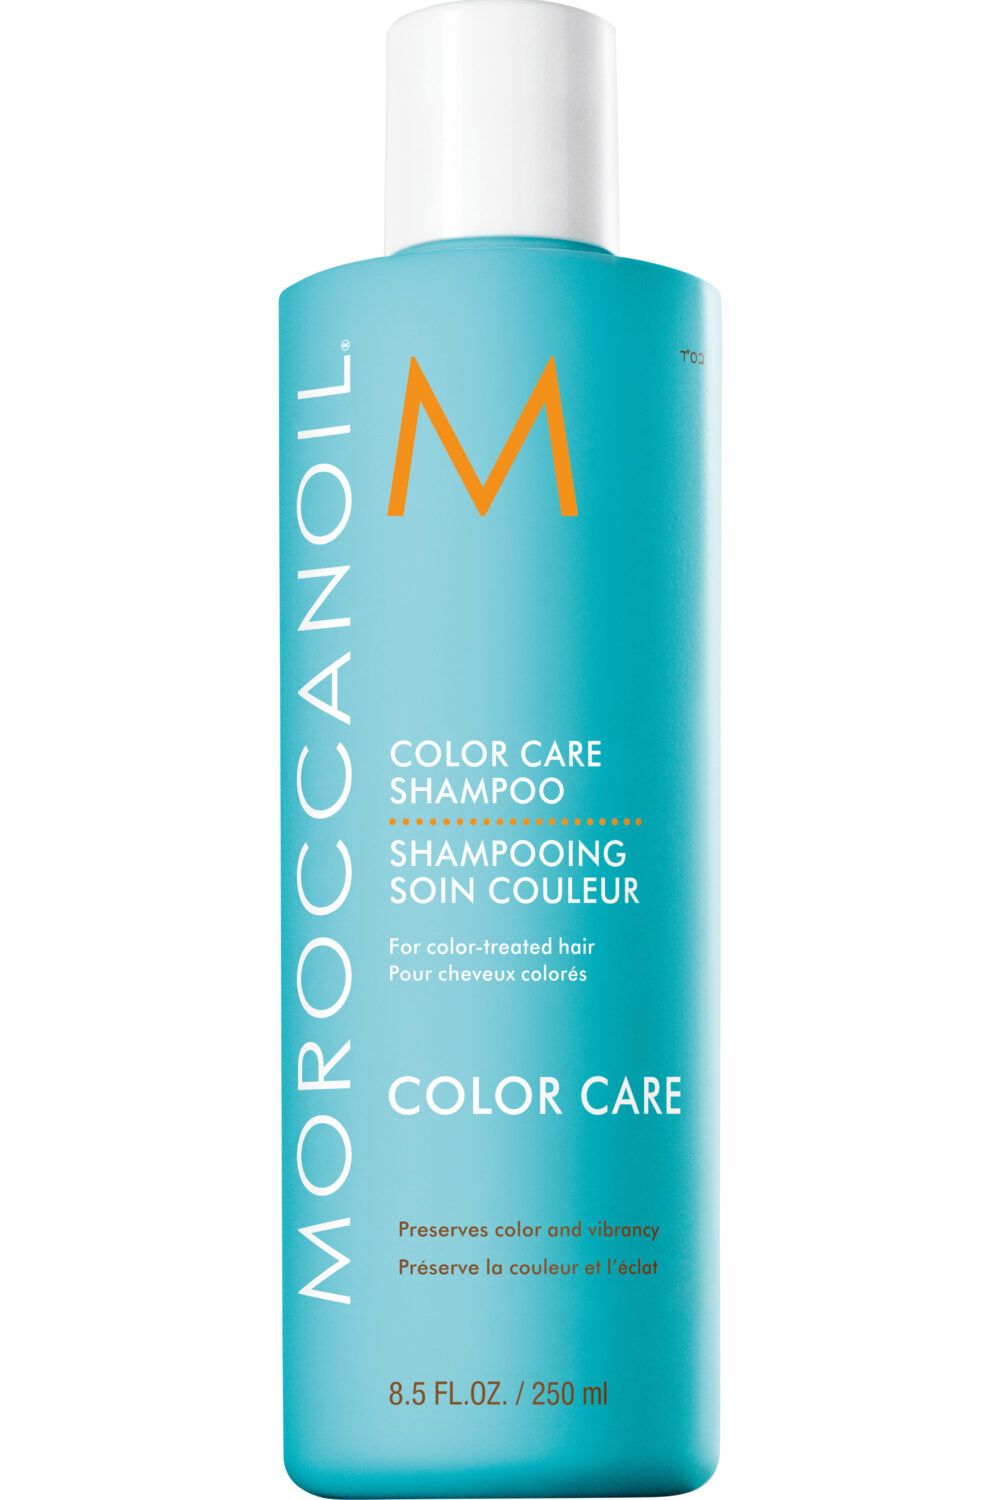 Moroccanoil - Shampoing soin couleur